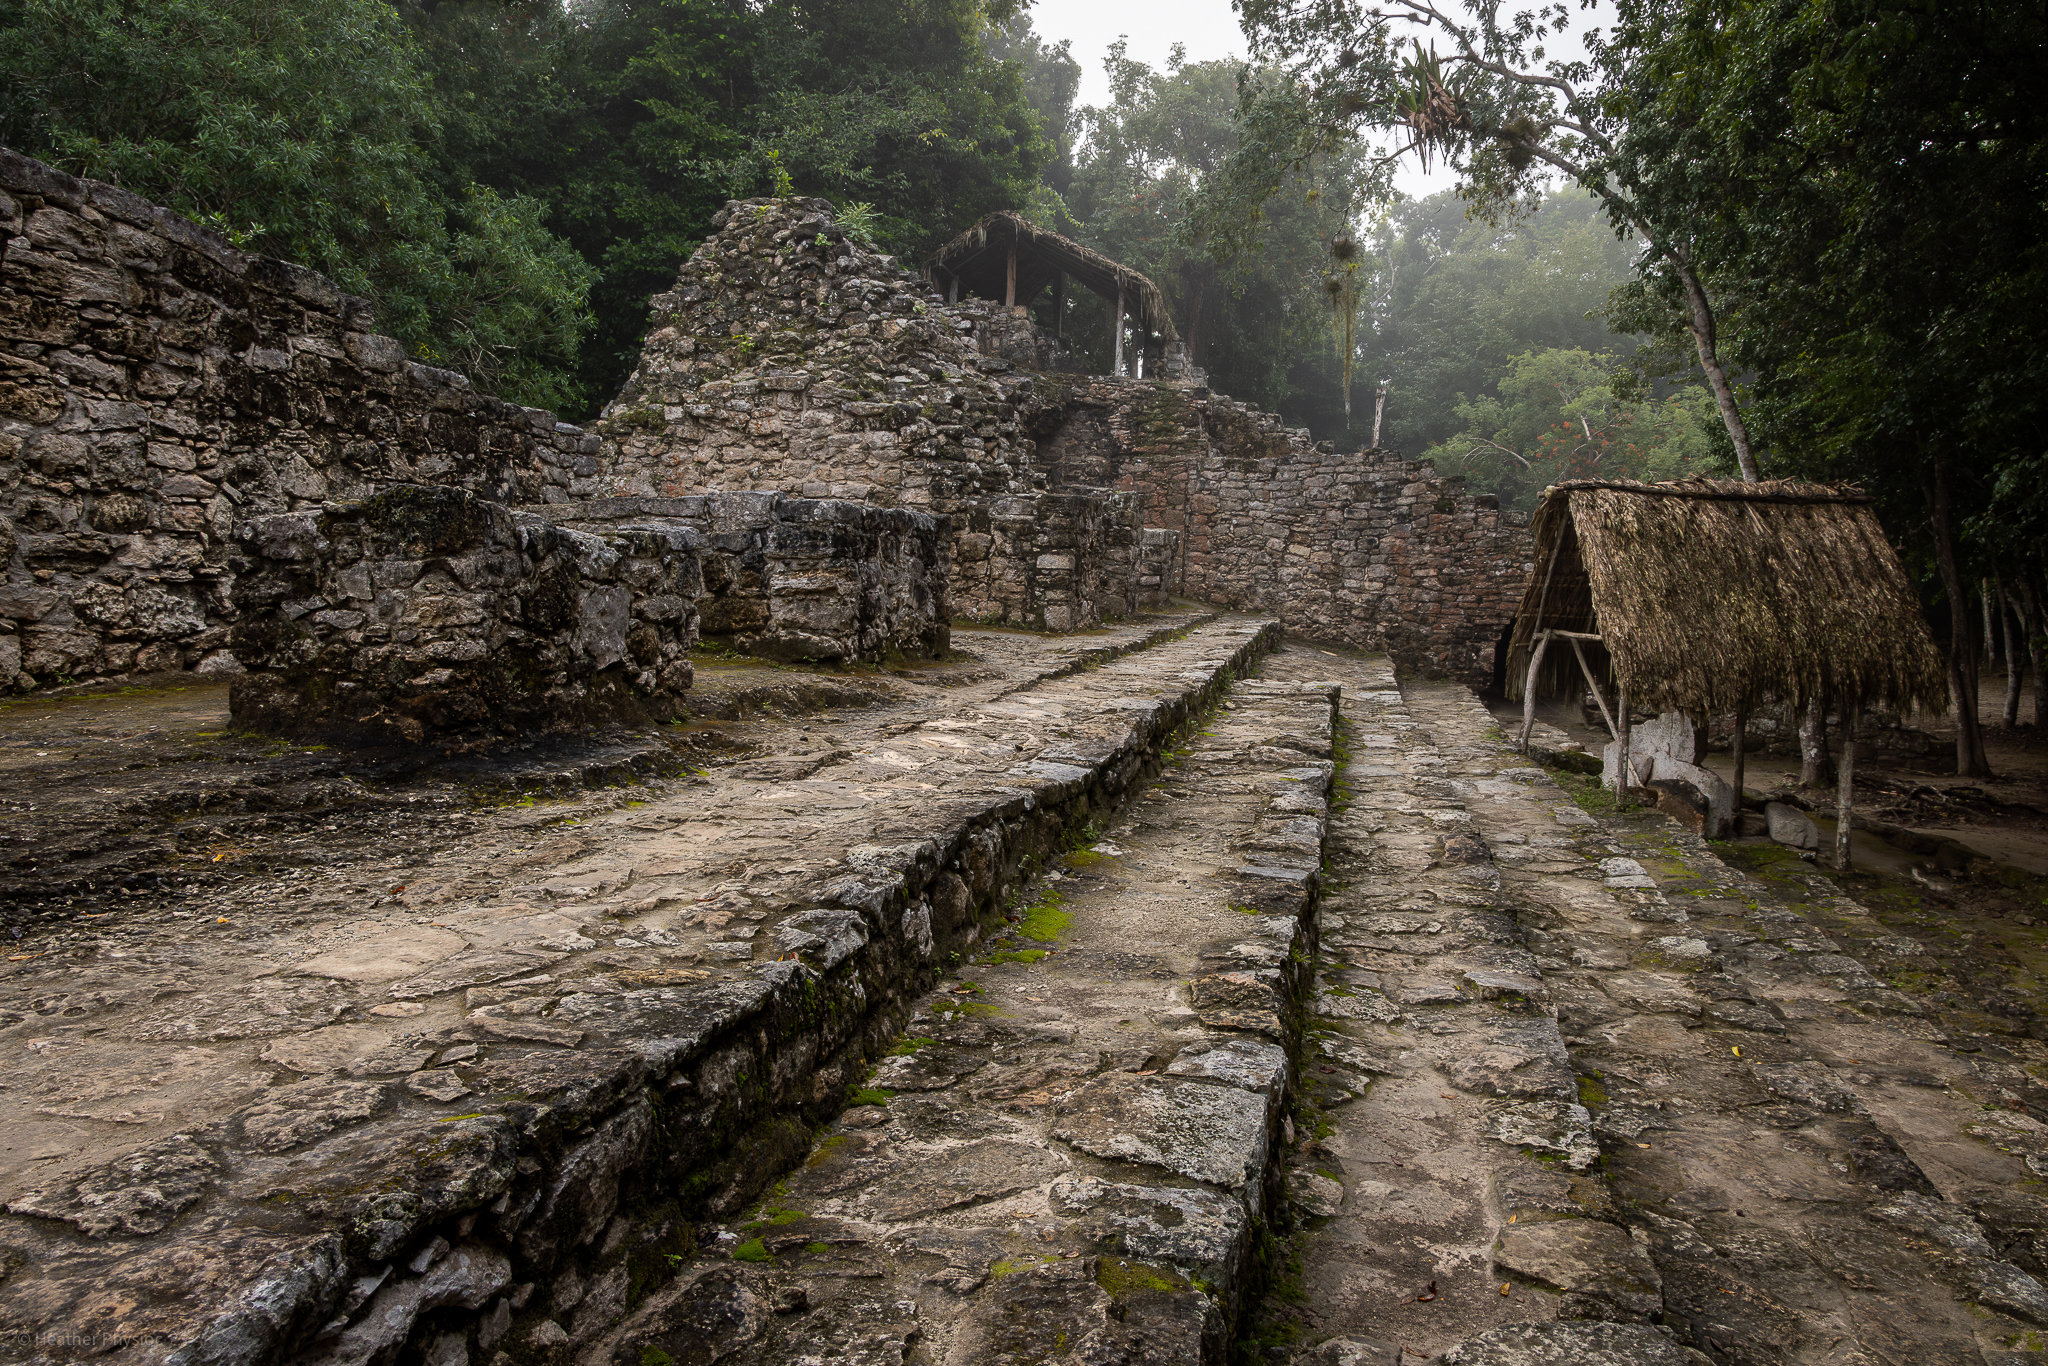 A wide view of the ancient Mayan ruins in Coba, featuring a stone-paved causeway leading to a pyramid with a thatched-roof shelter, set in a serene Mexican jungle landscape.